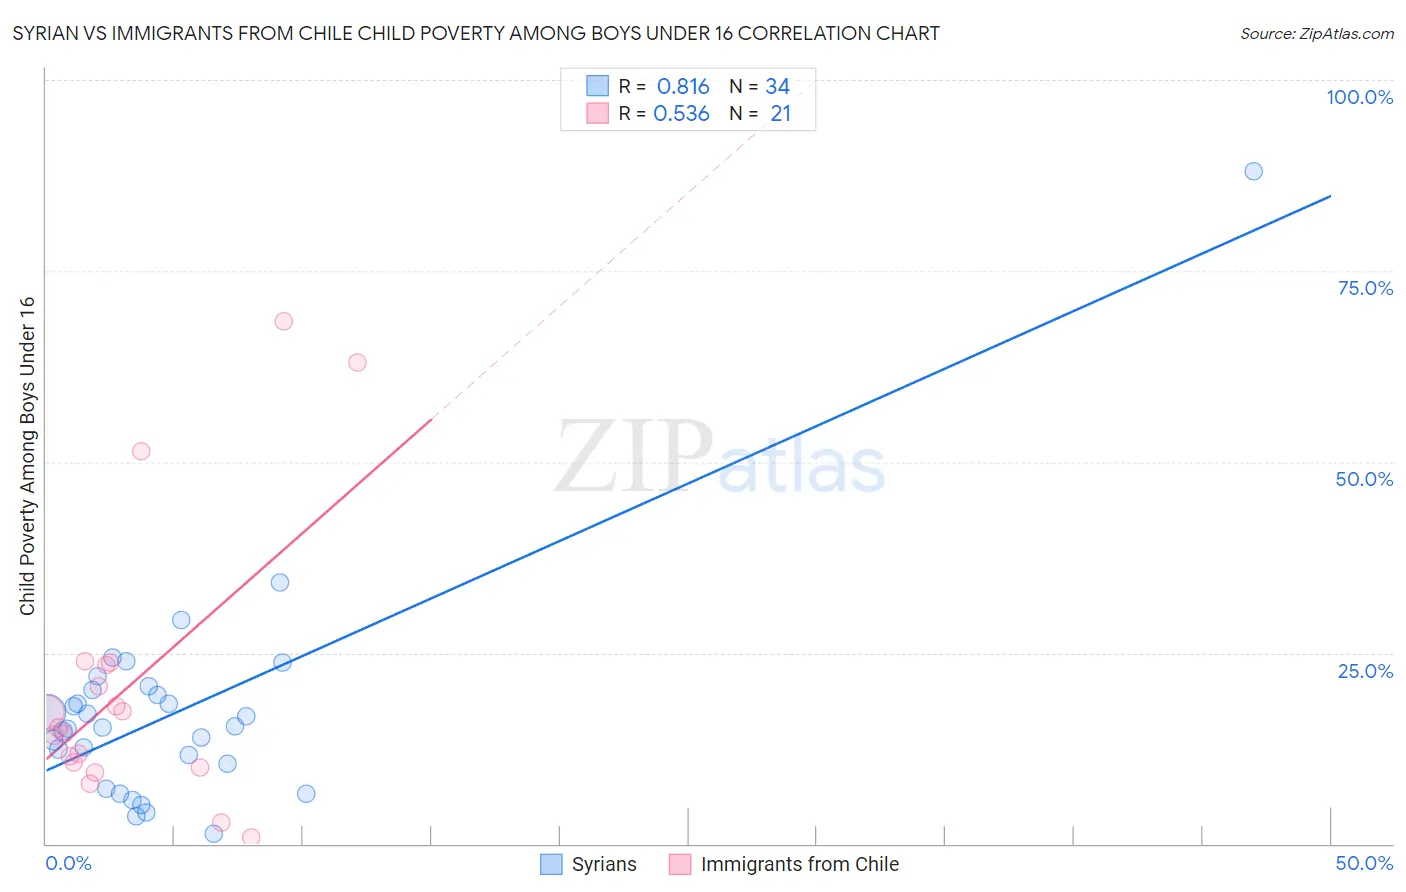 Syrian vs Immigrants from Chile Child Poverty Among Boys Under 16